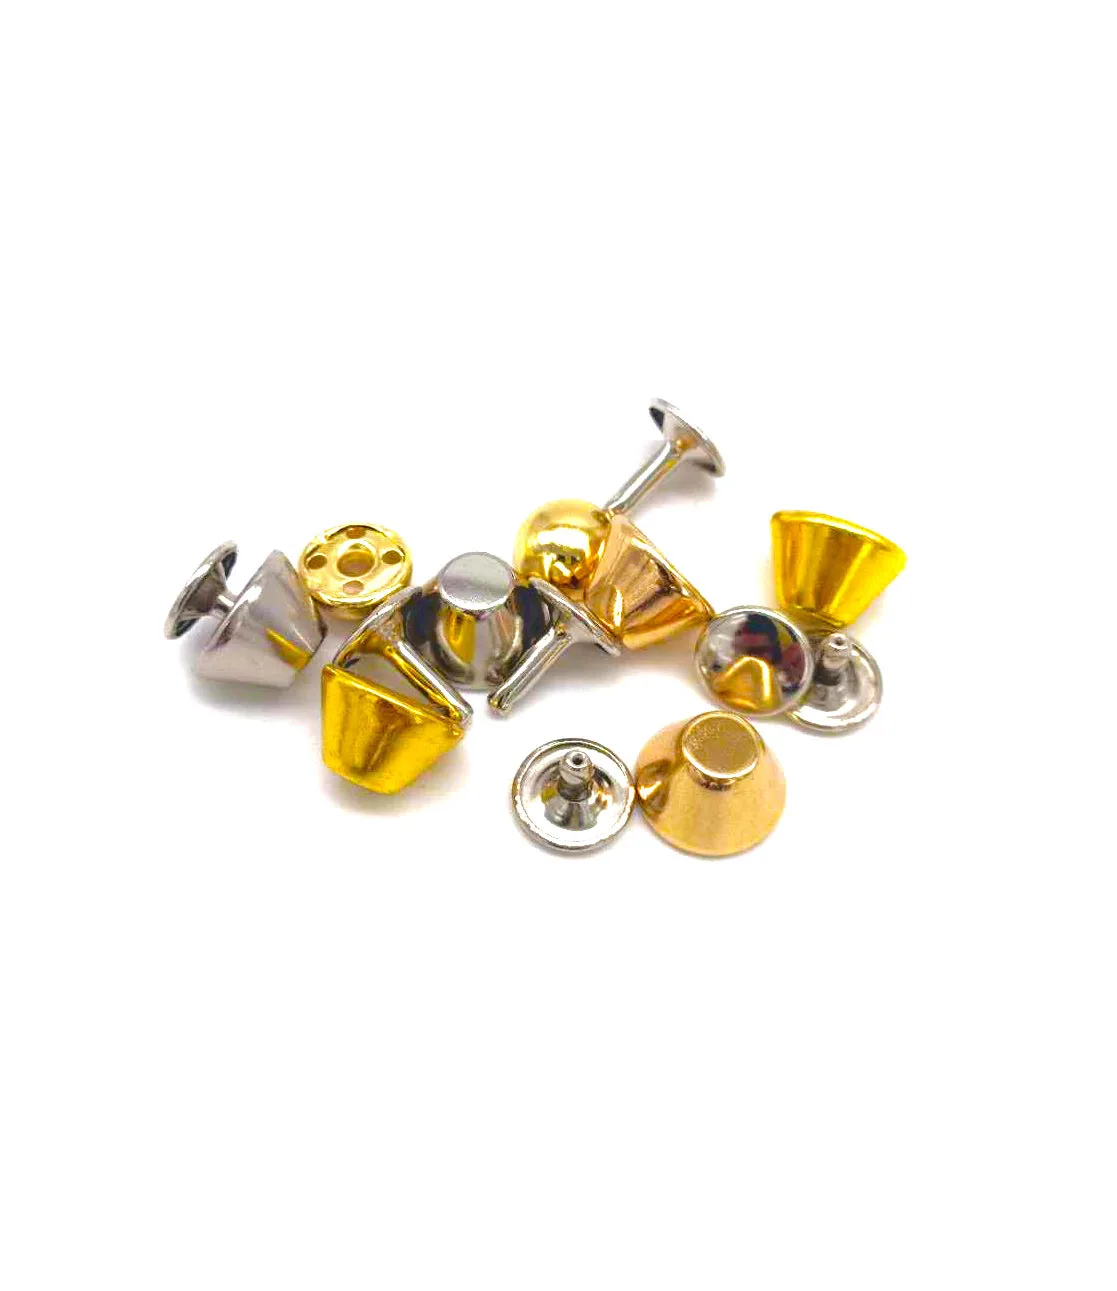 

Metal Dome Cap Rivets Studs Round Rivet for Leather Craft Bag Belt Clothing Garment Shoes Collar Parts Accessories